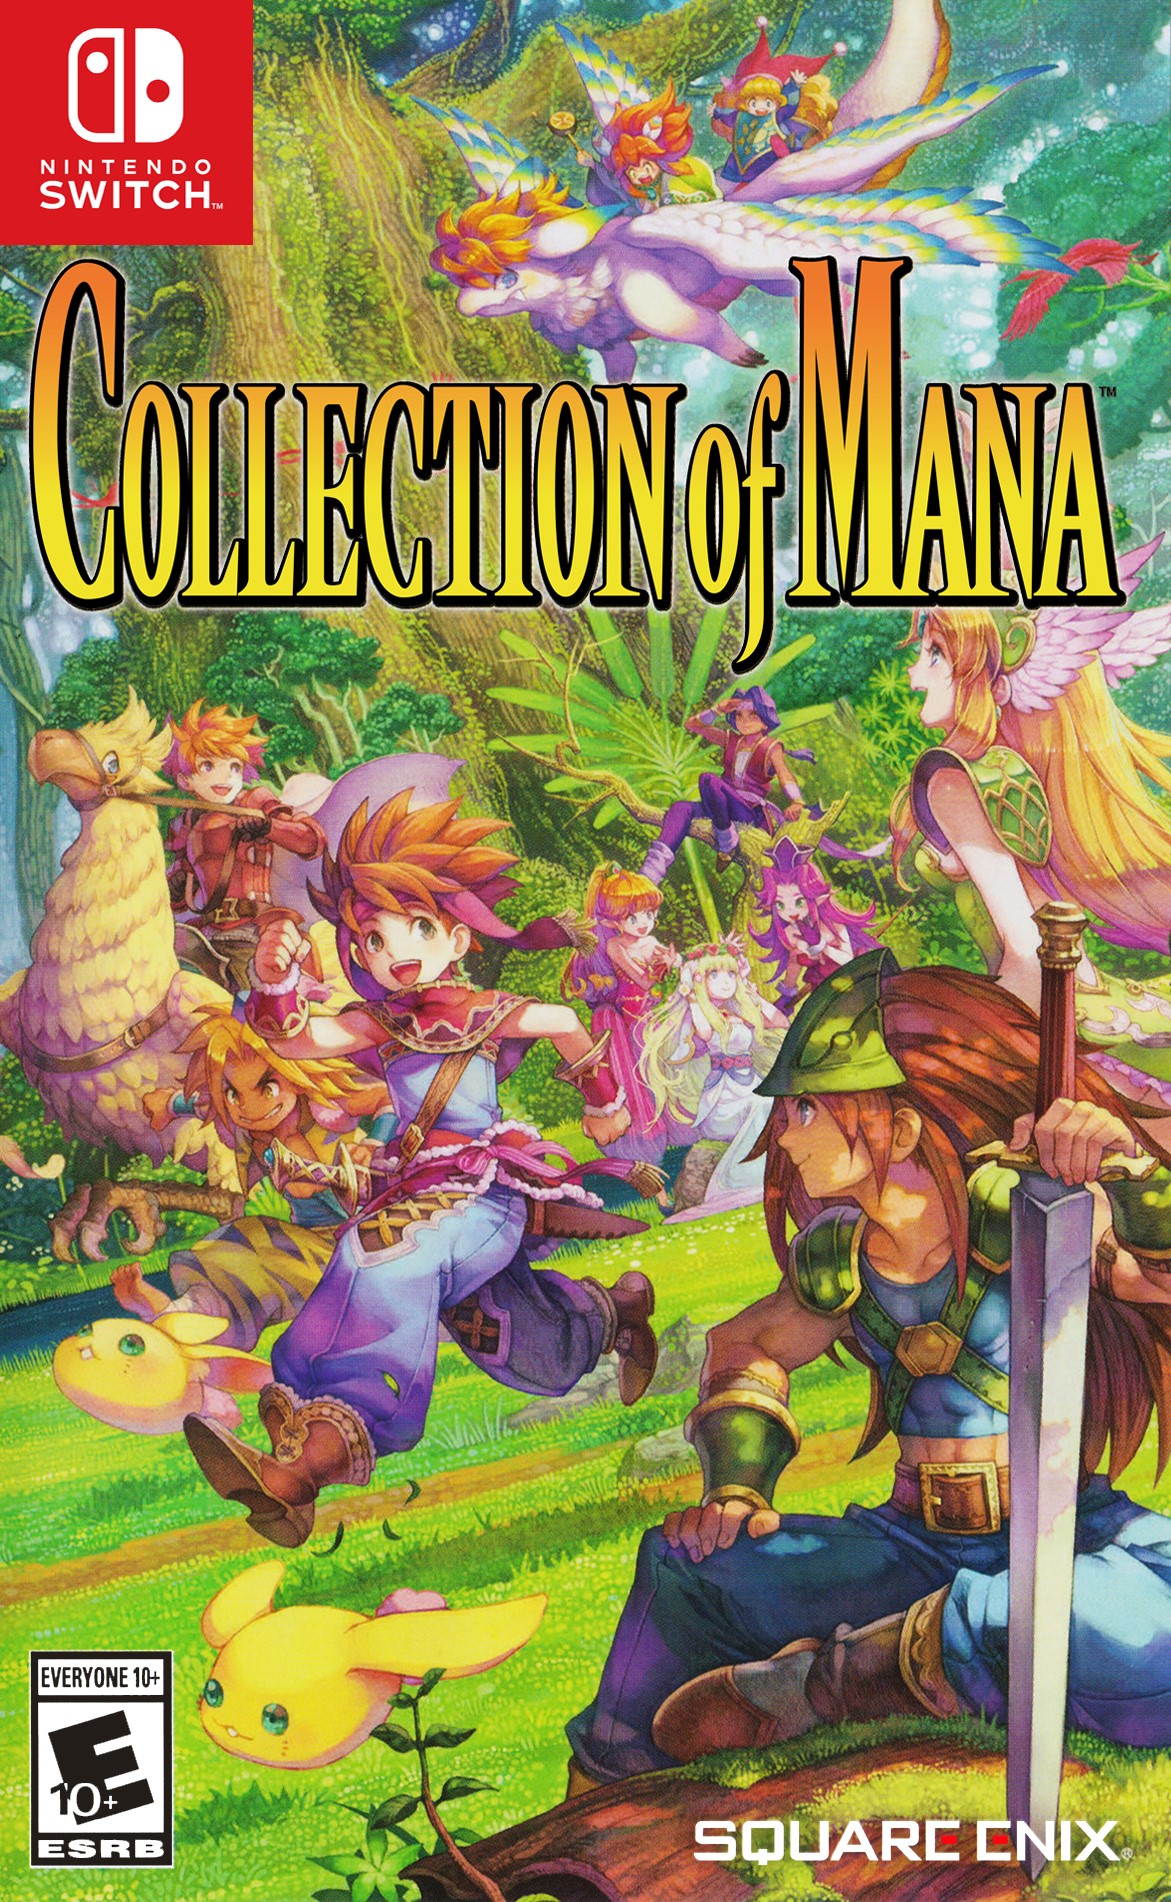 'Collection of Mana'